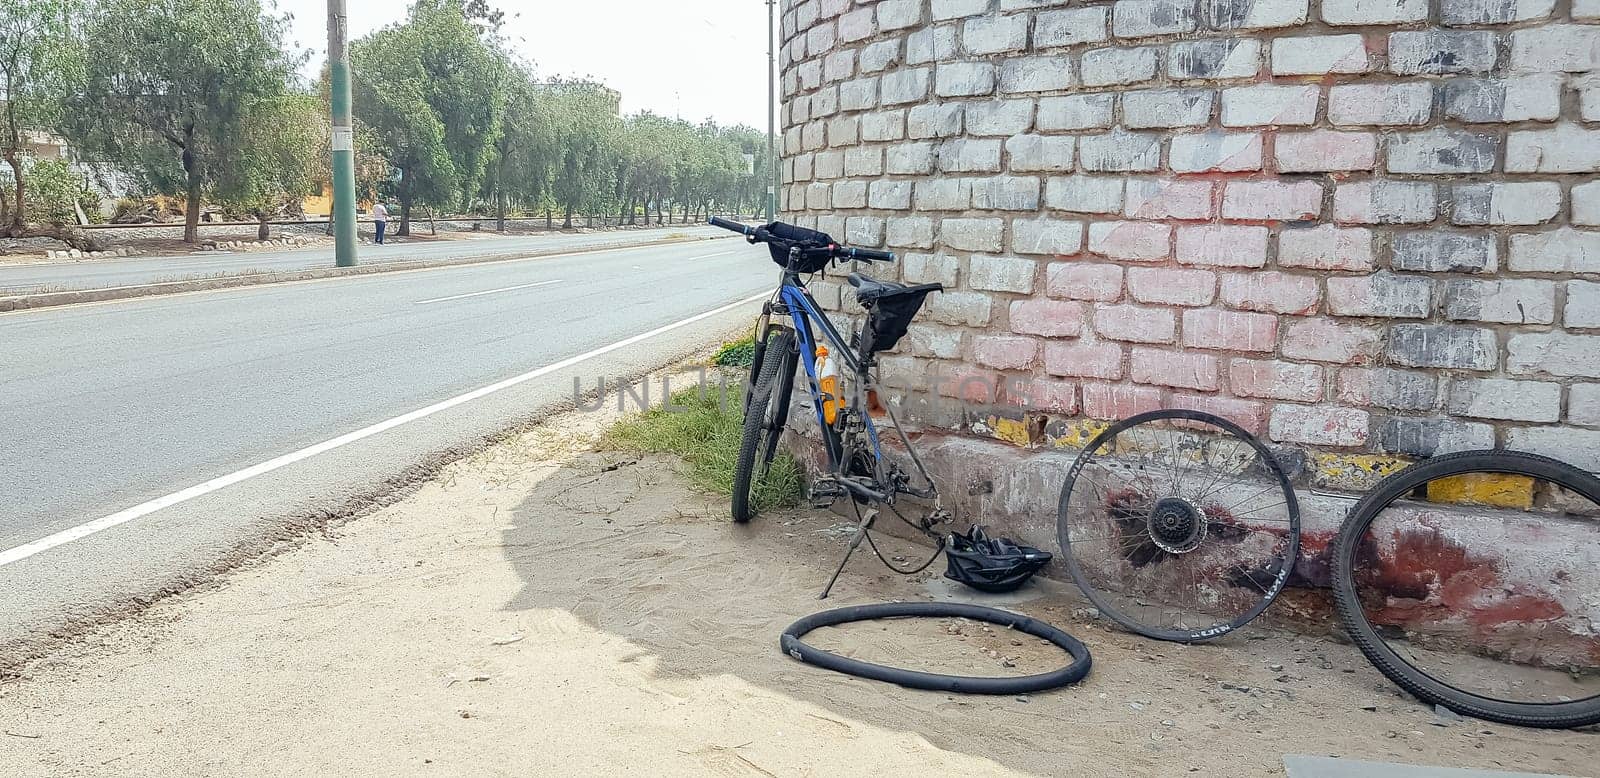 Bicycle repair in the middle of the road, rim chamber with hole